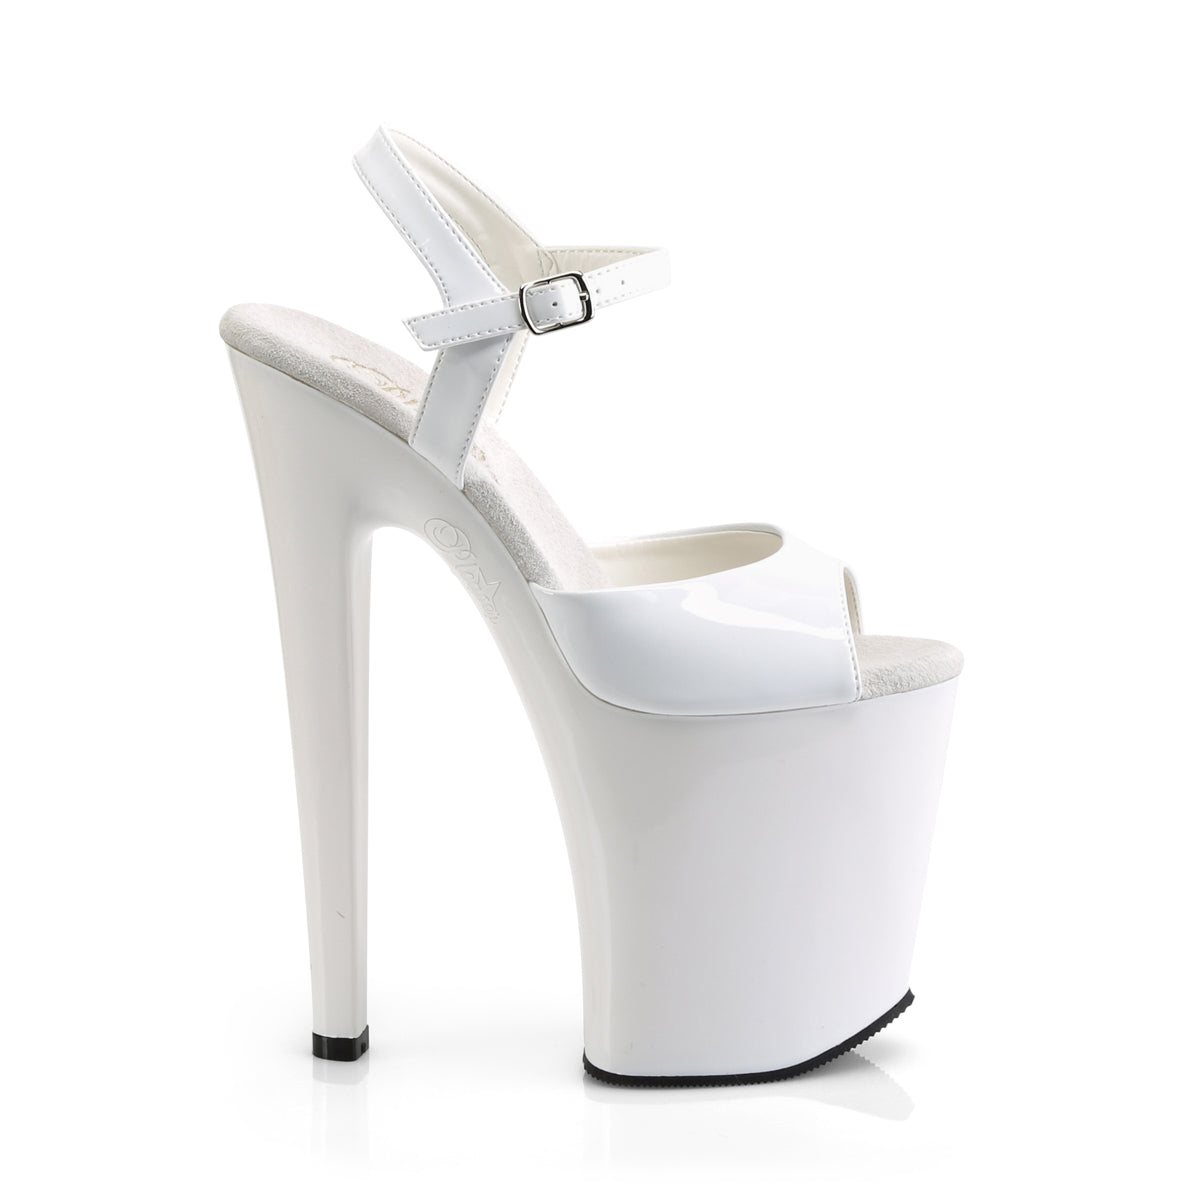 XTREME-809 8" Heel White Patent Pole Dancing Platforms Shoes-Pleaser- Sexy Shoes Fetish Heels